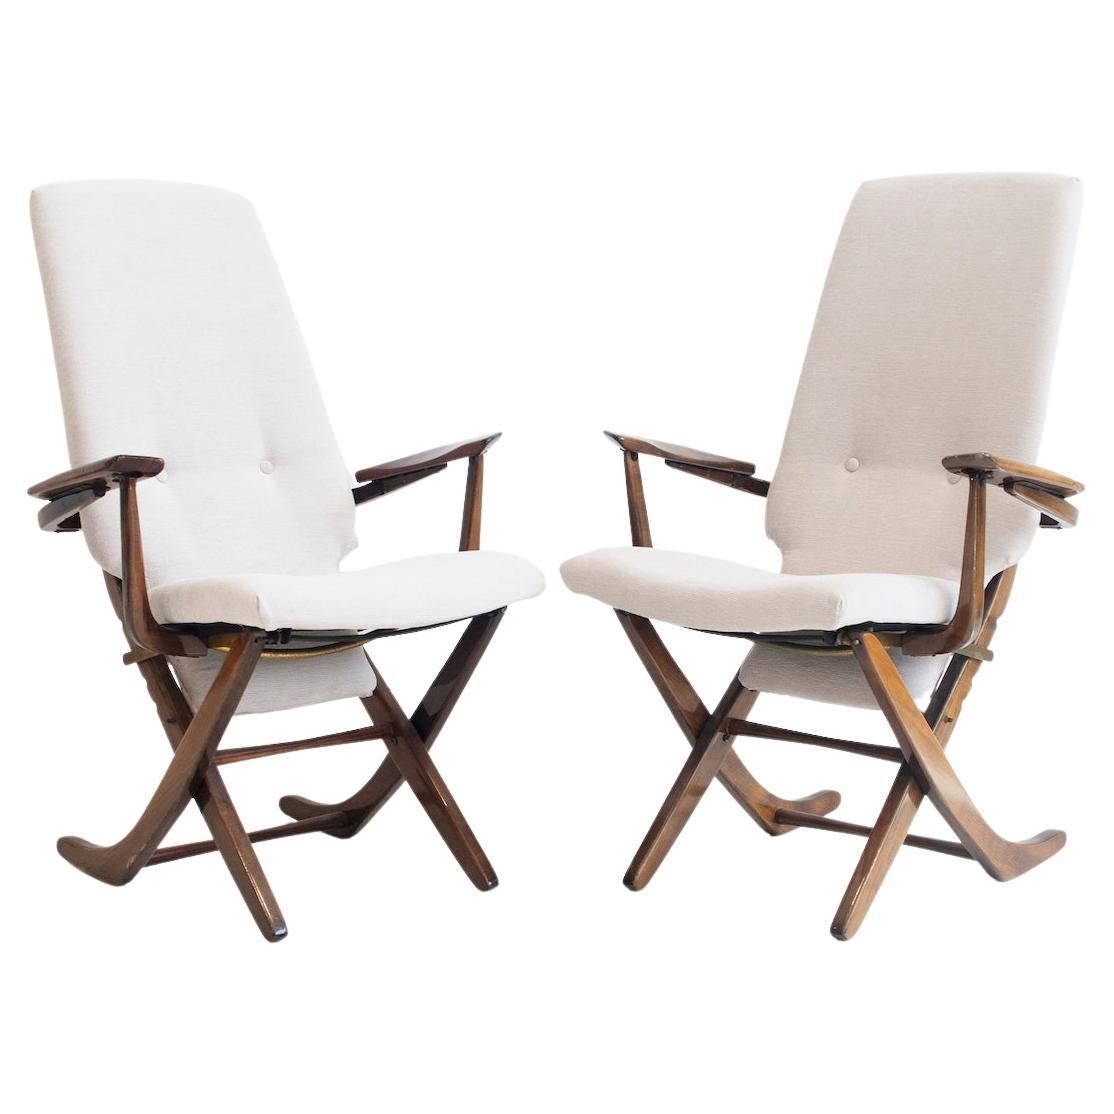 Pair of Light Fabric Upholstered Recliner Chairs of Varnished Wood